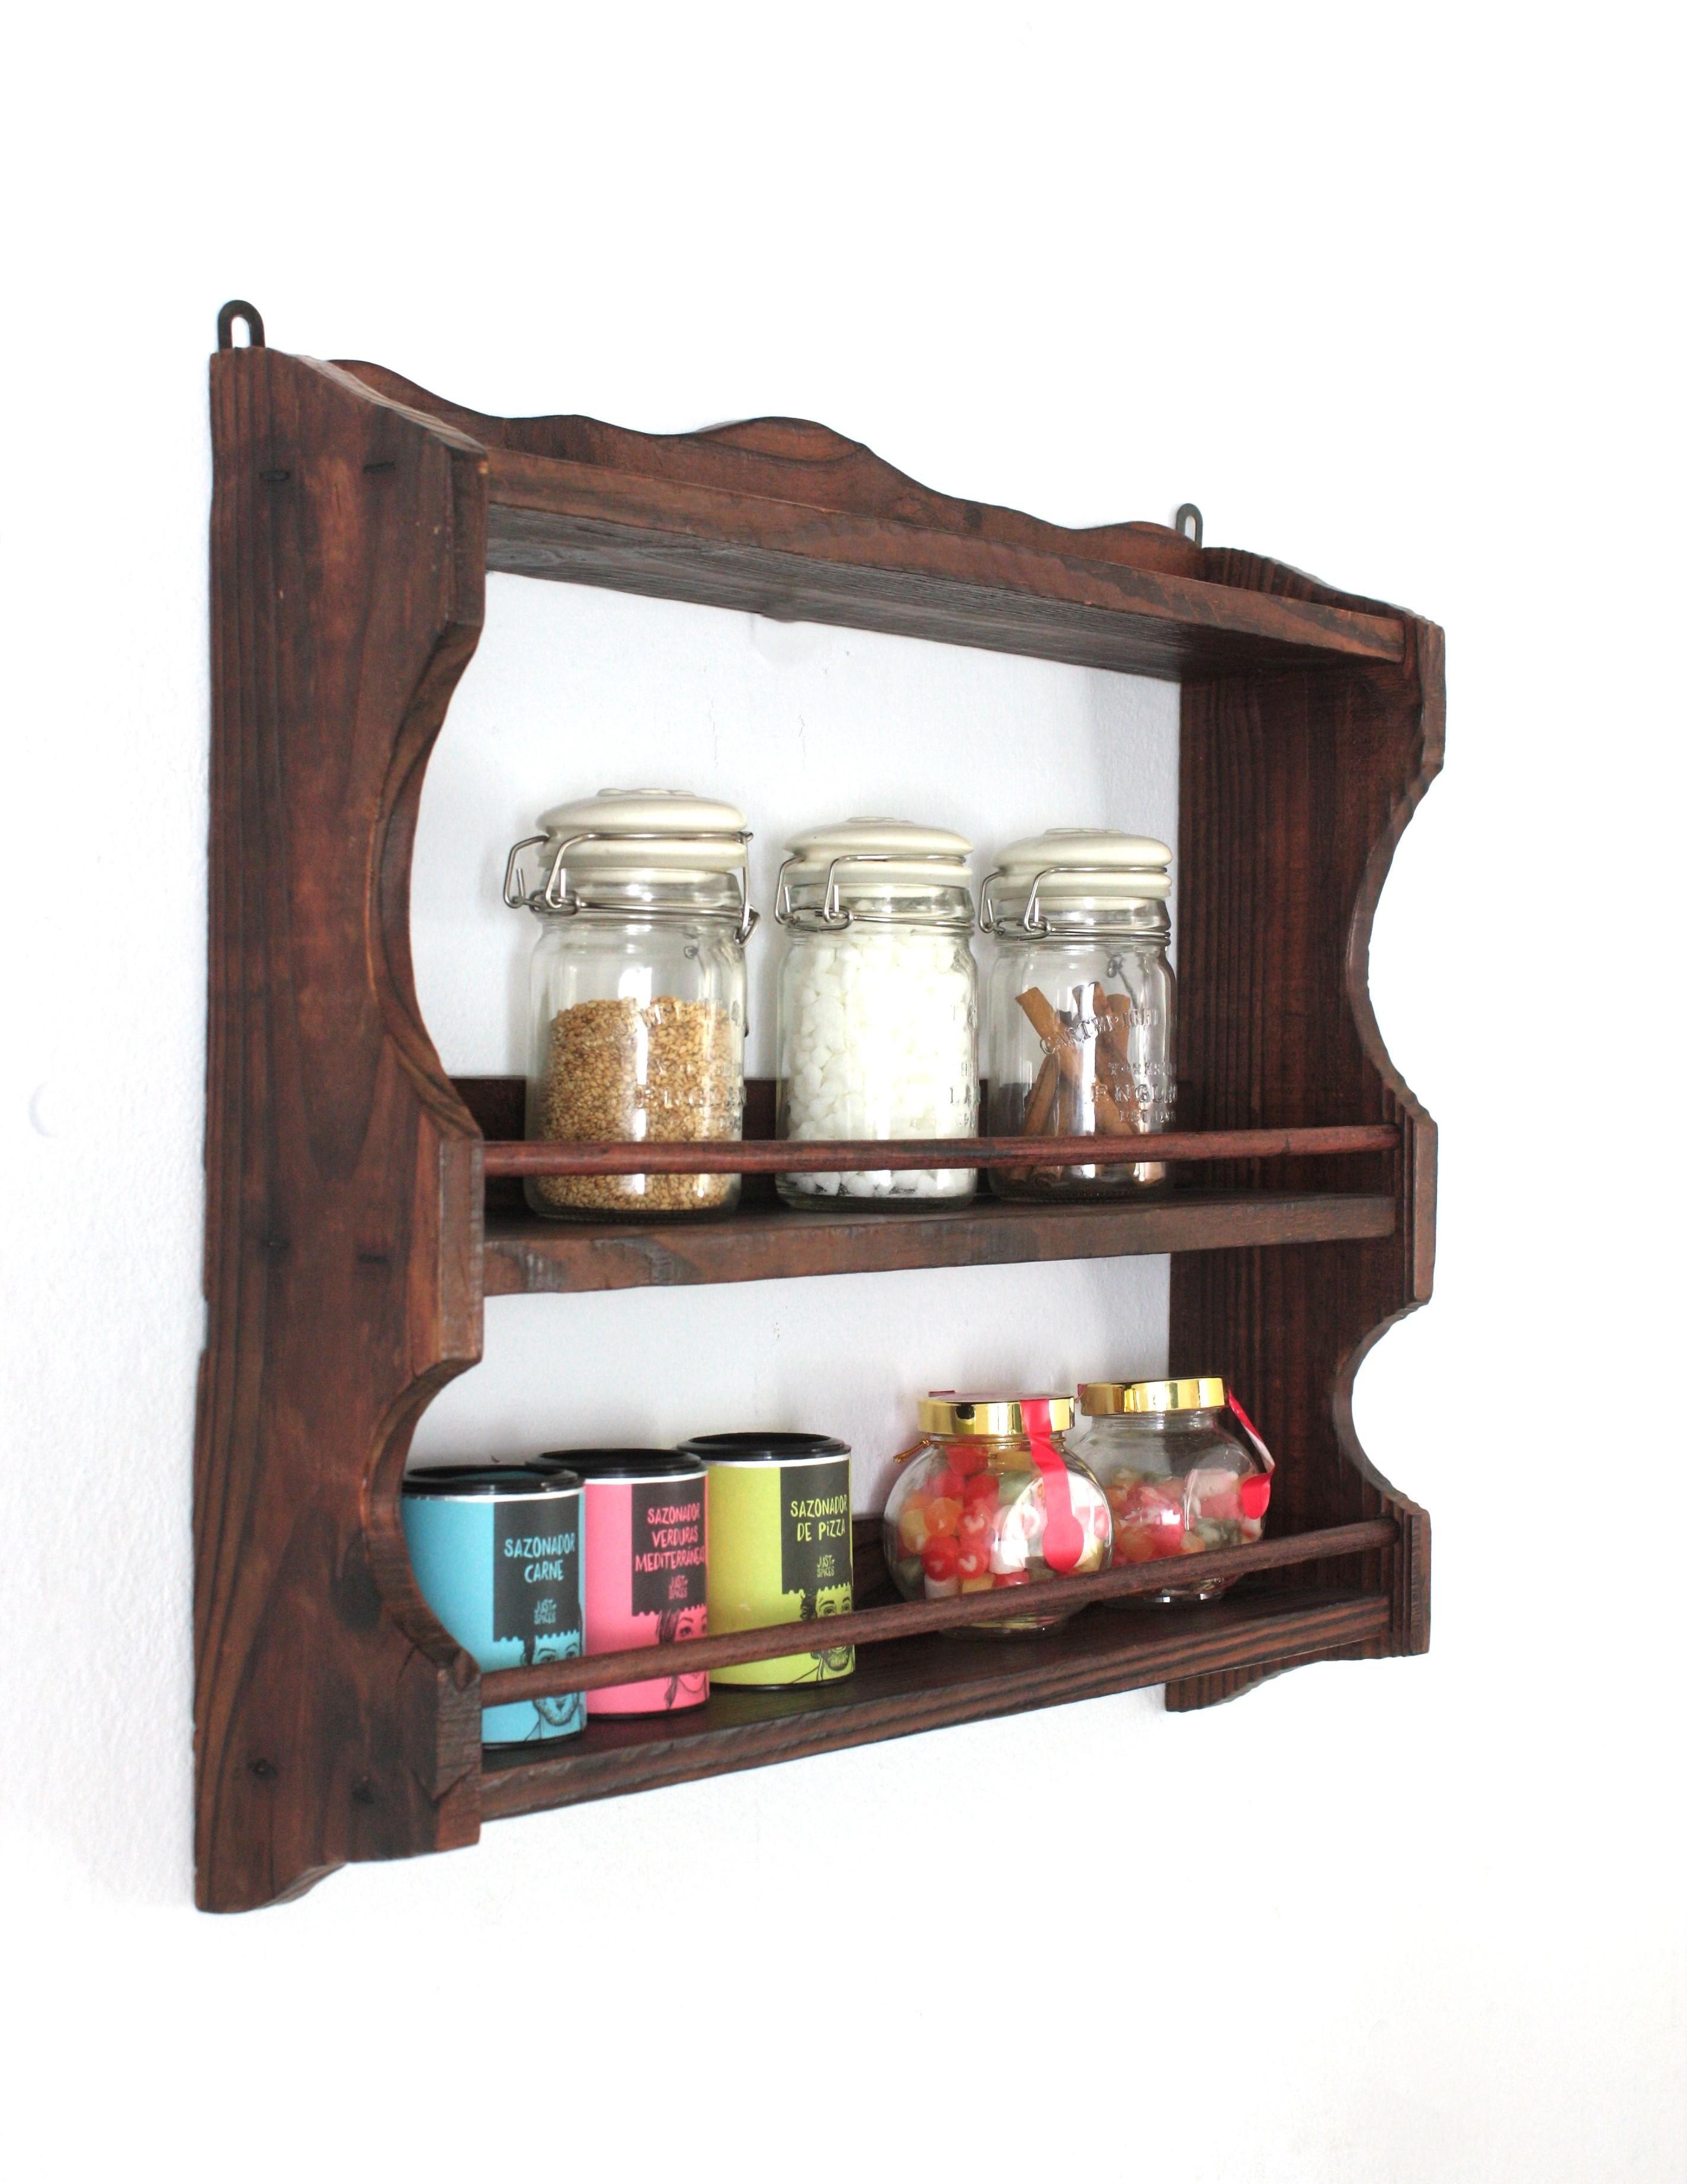 Spanish Colonial Wood Spice Rack Wall Shelf, 1940s
Hand-carved pine spice rack or wall shelf, Spain, 1940s-1950s
This spice rack shelf has scalloped and carved details and decorative iron nails
it has a rustic finish and Spanish colonial accents.
It